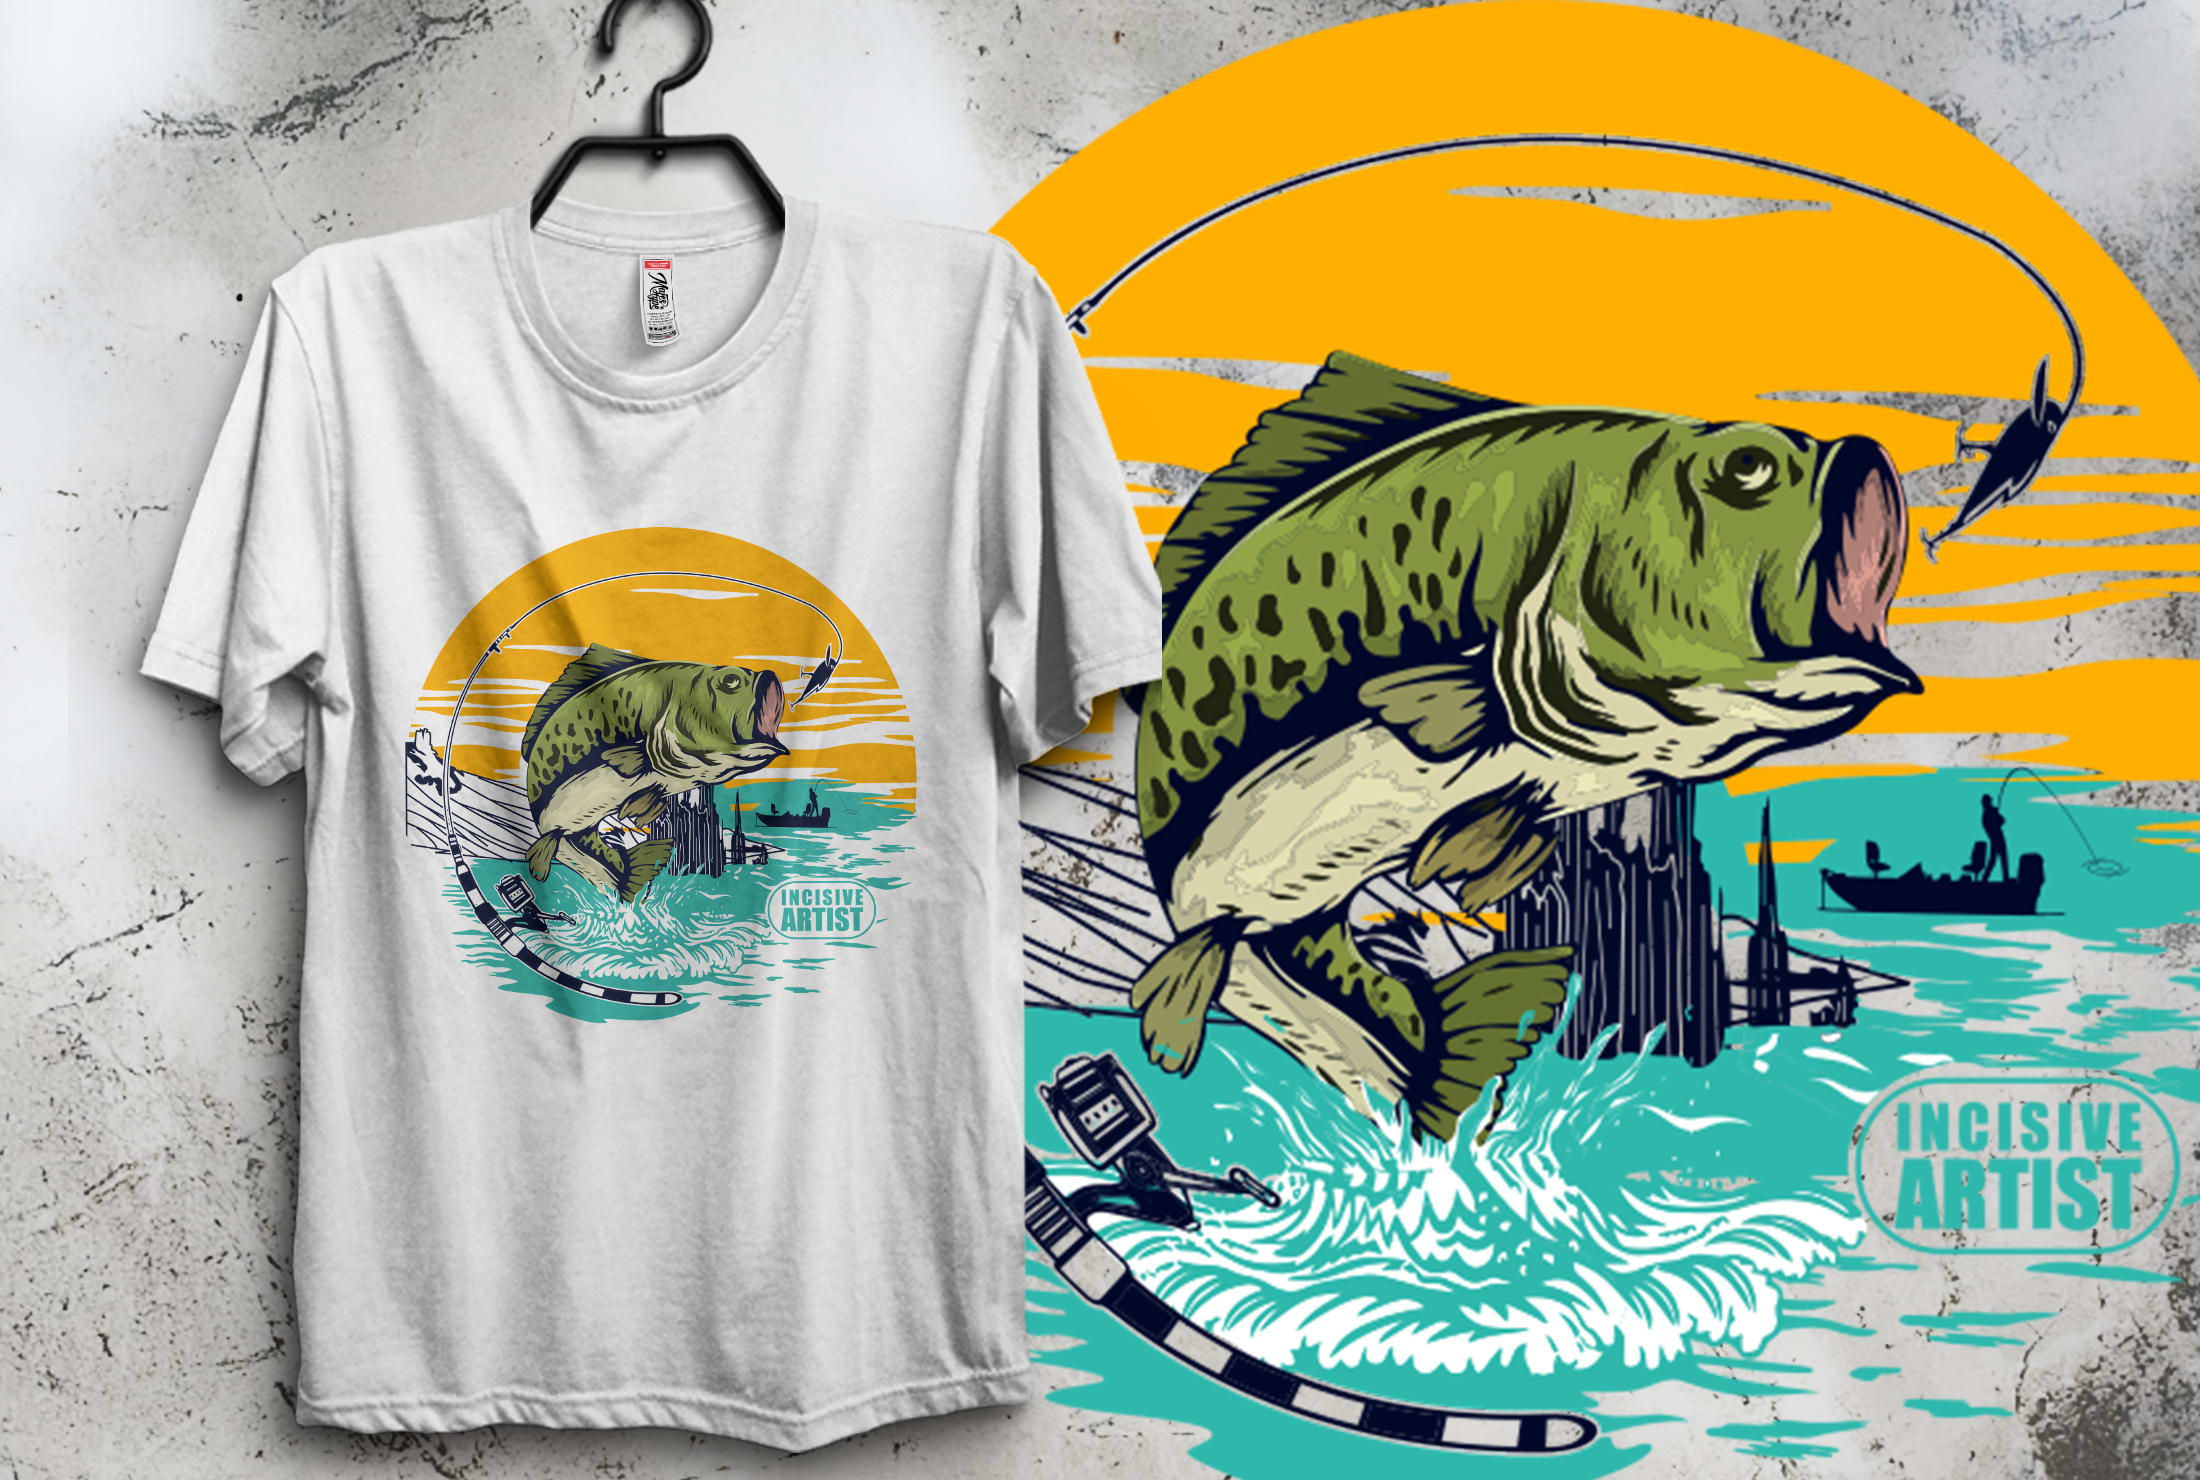 Design fishing and outdoor artwork illustration t shirt by